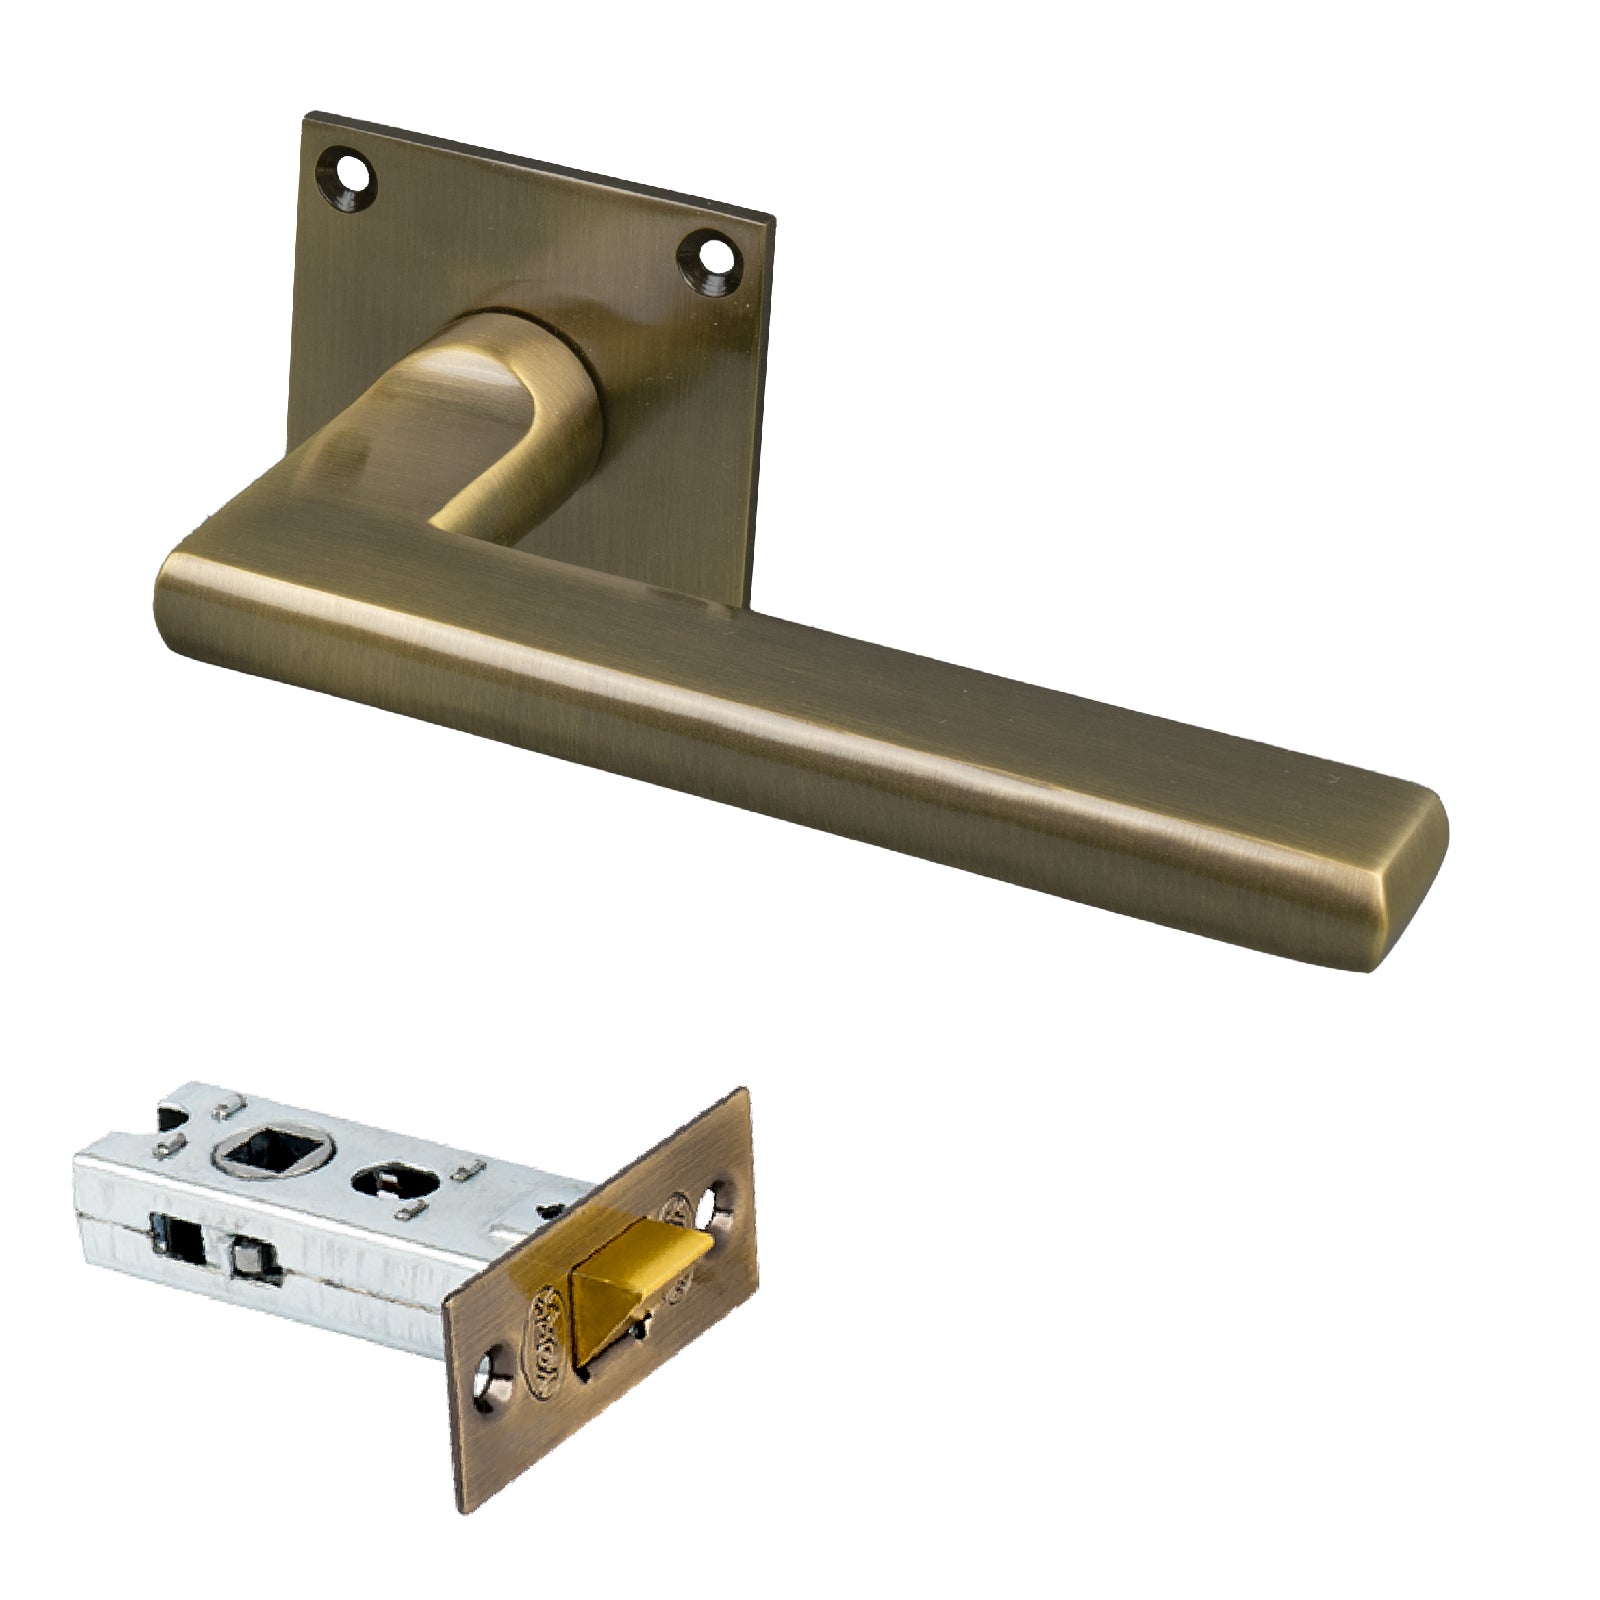 SHOW Trident Square Rose Door Handles Tubular Latch Set with Aged Brass finish